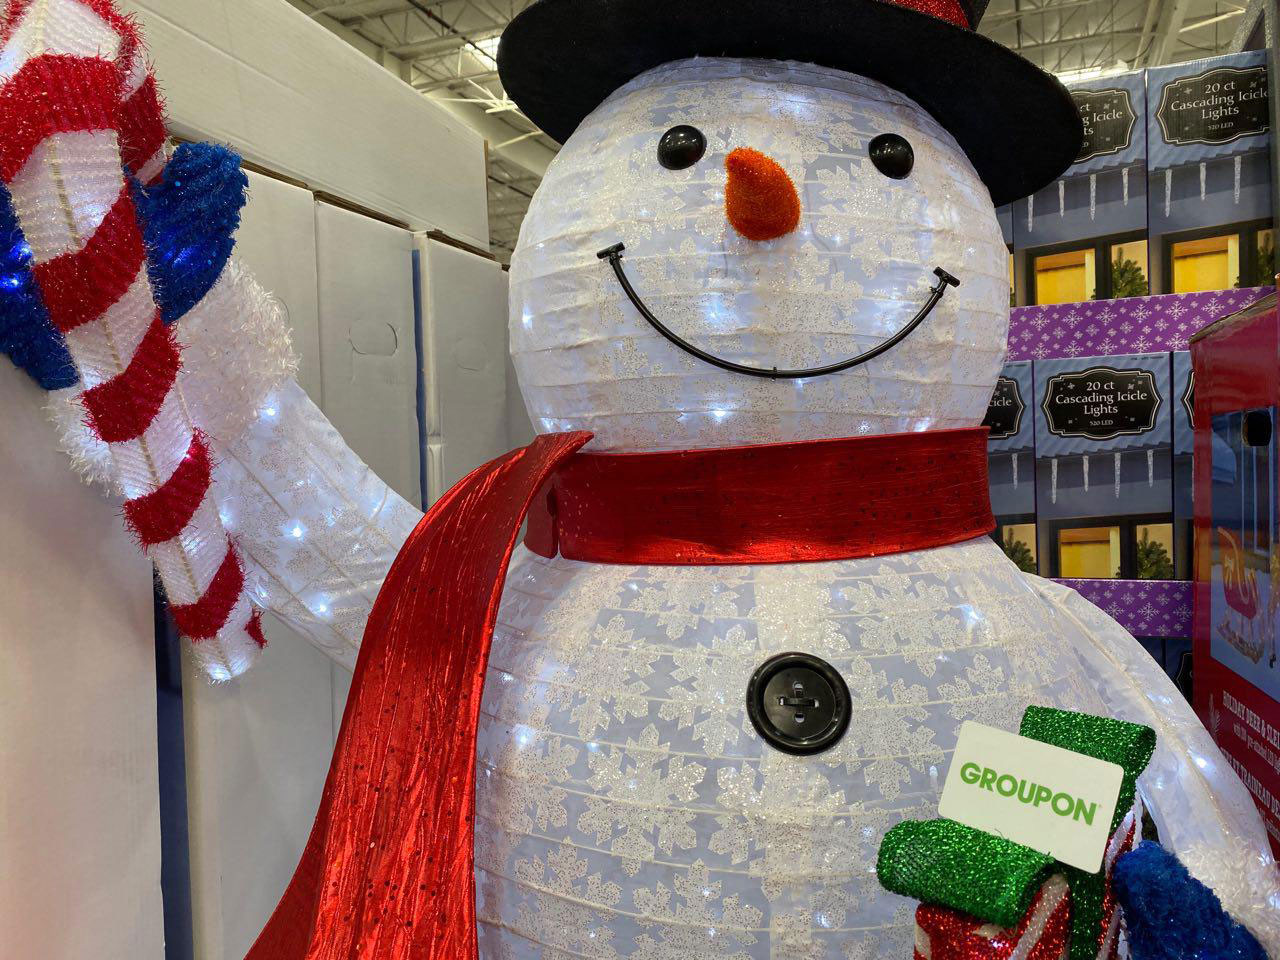 Costco Christmas Decor with Groupon Discount 2019